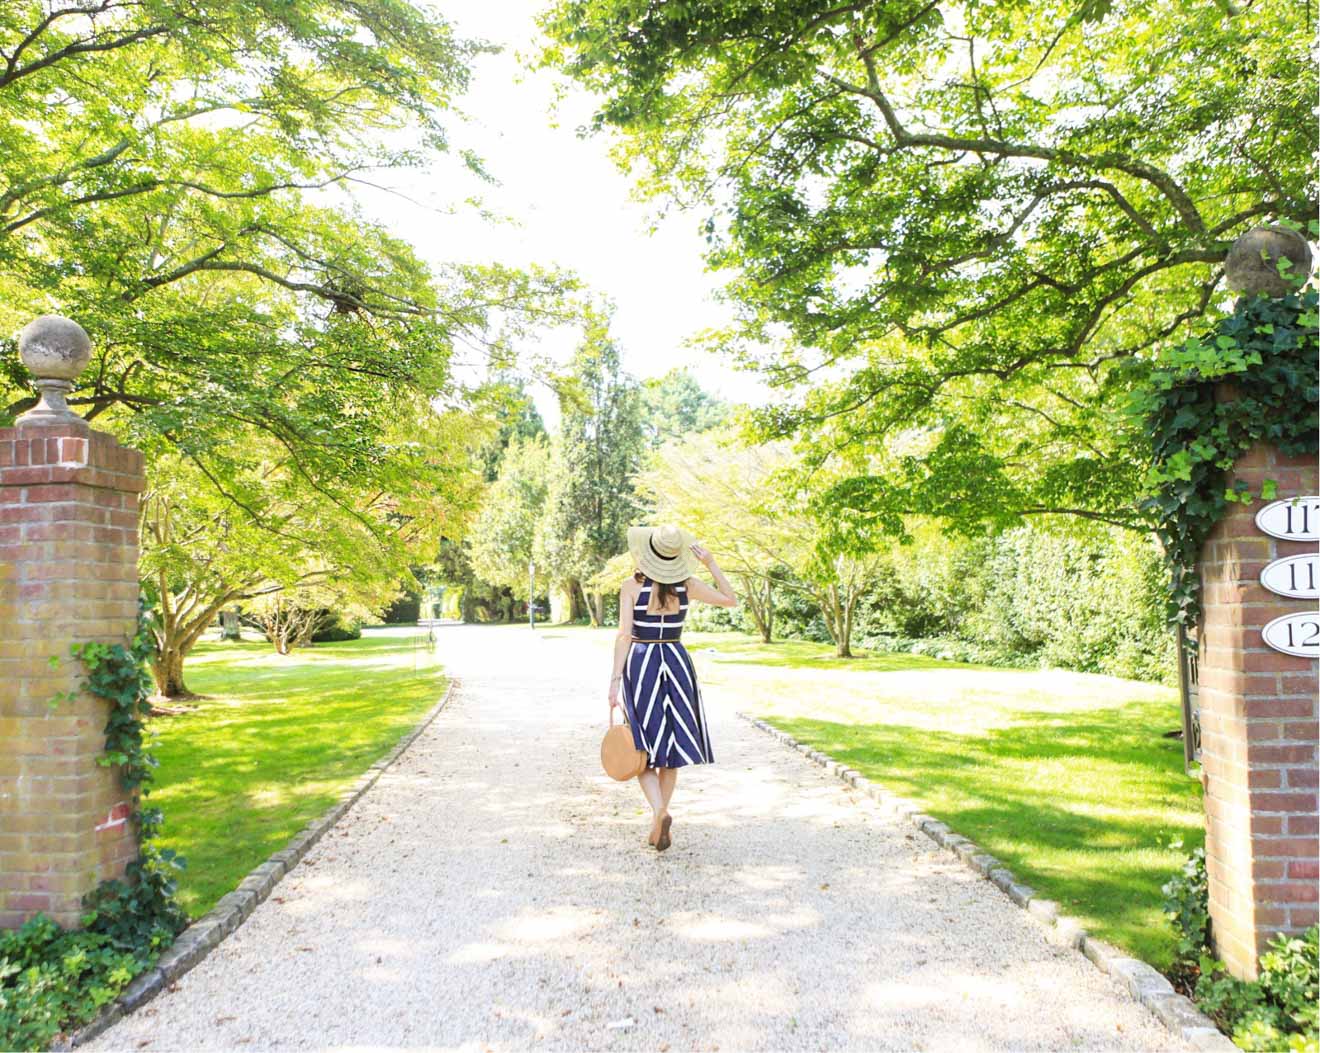 Hamptons Travel Guide, Laura Lily Fashion Travel and Lifestyle Blog, Best Places to See in The Hamptons, Nautical Stripe Eliza J Dress